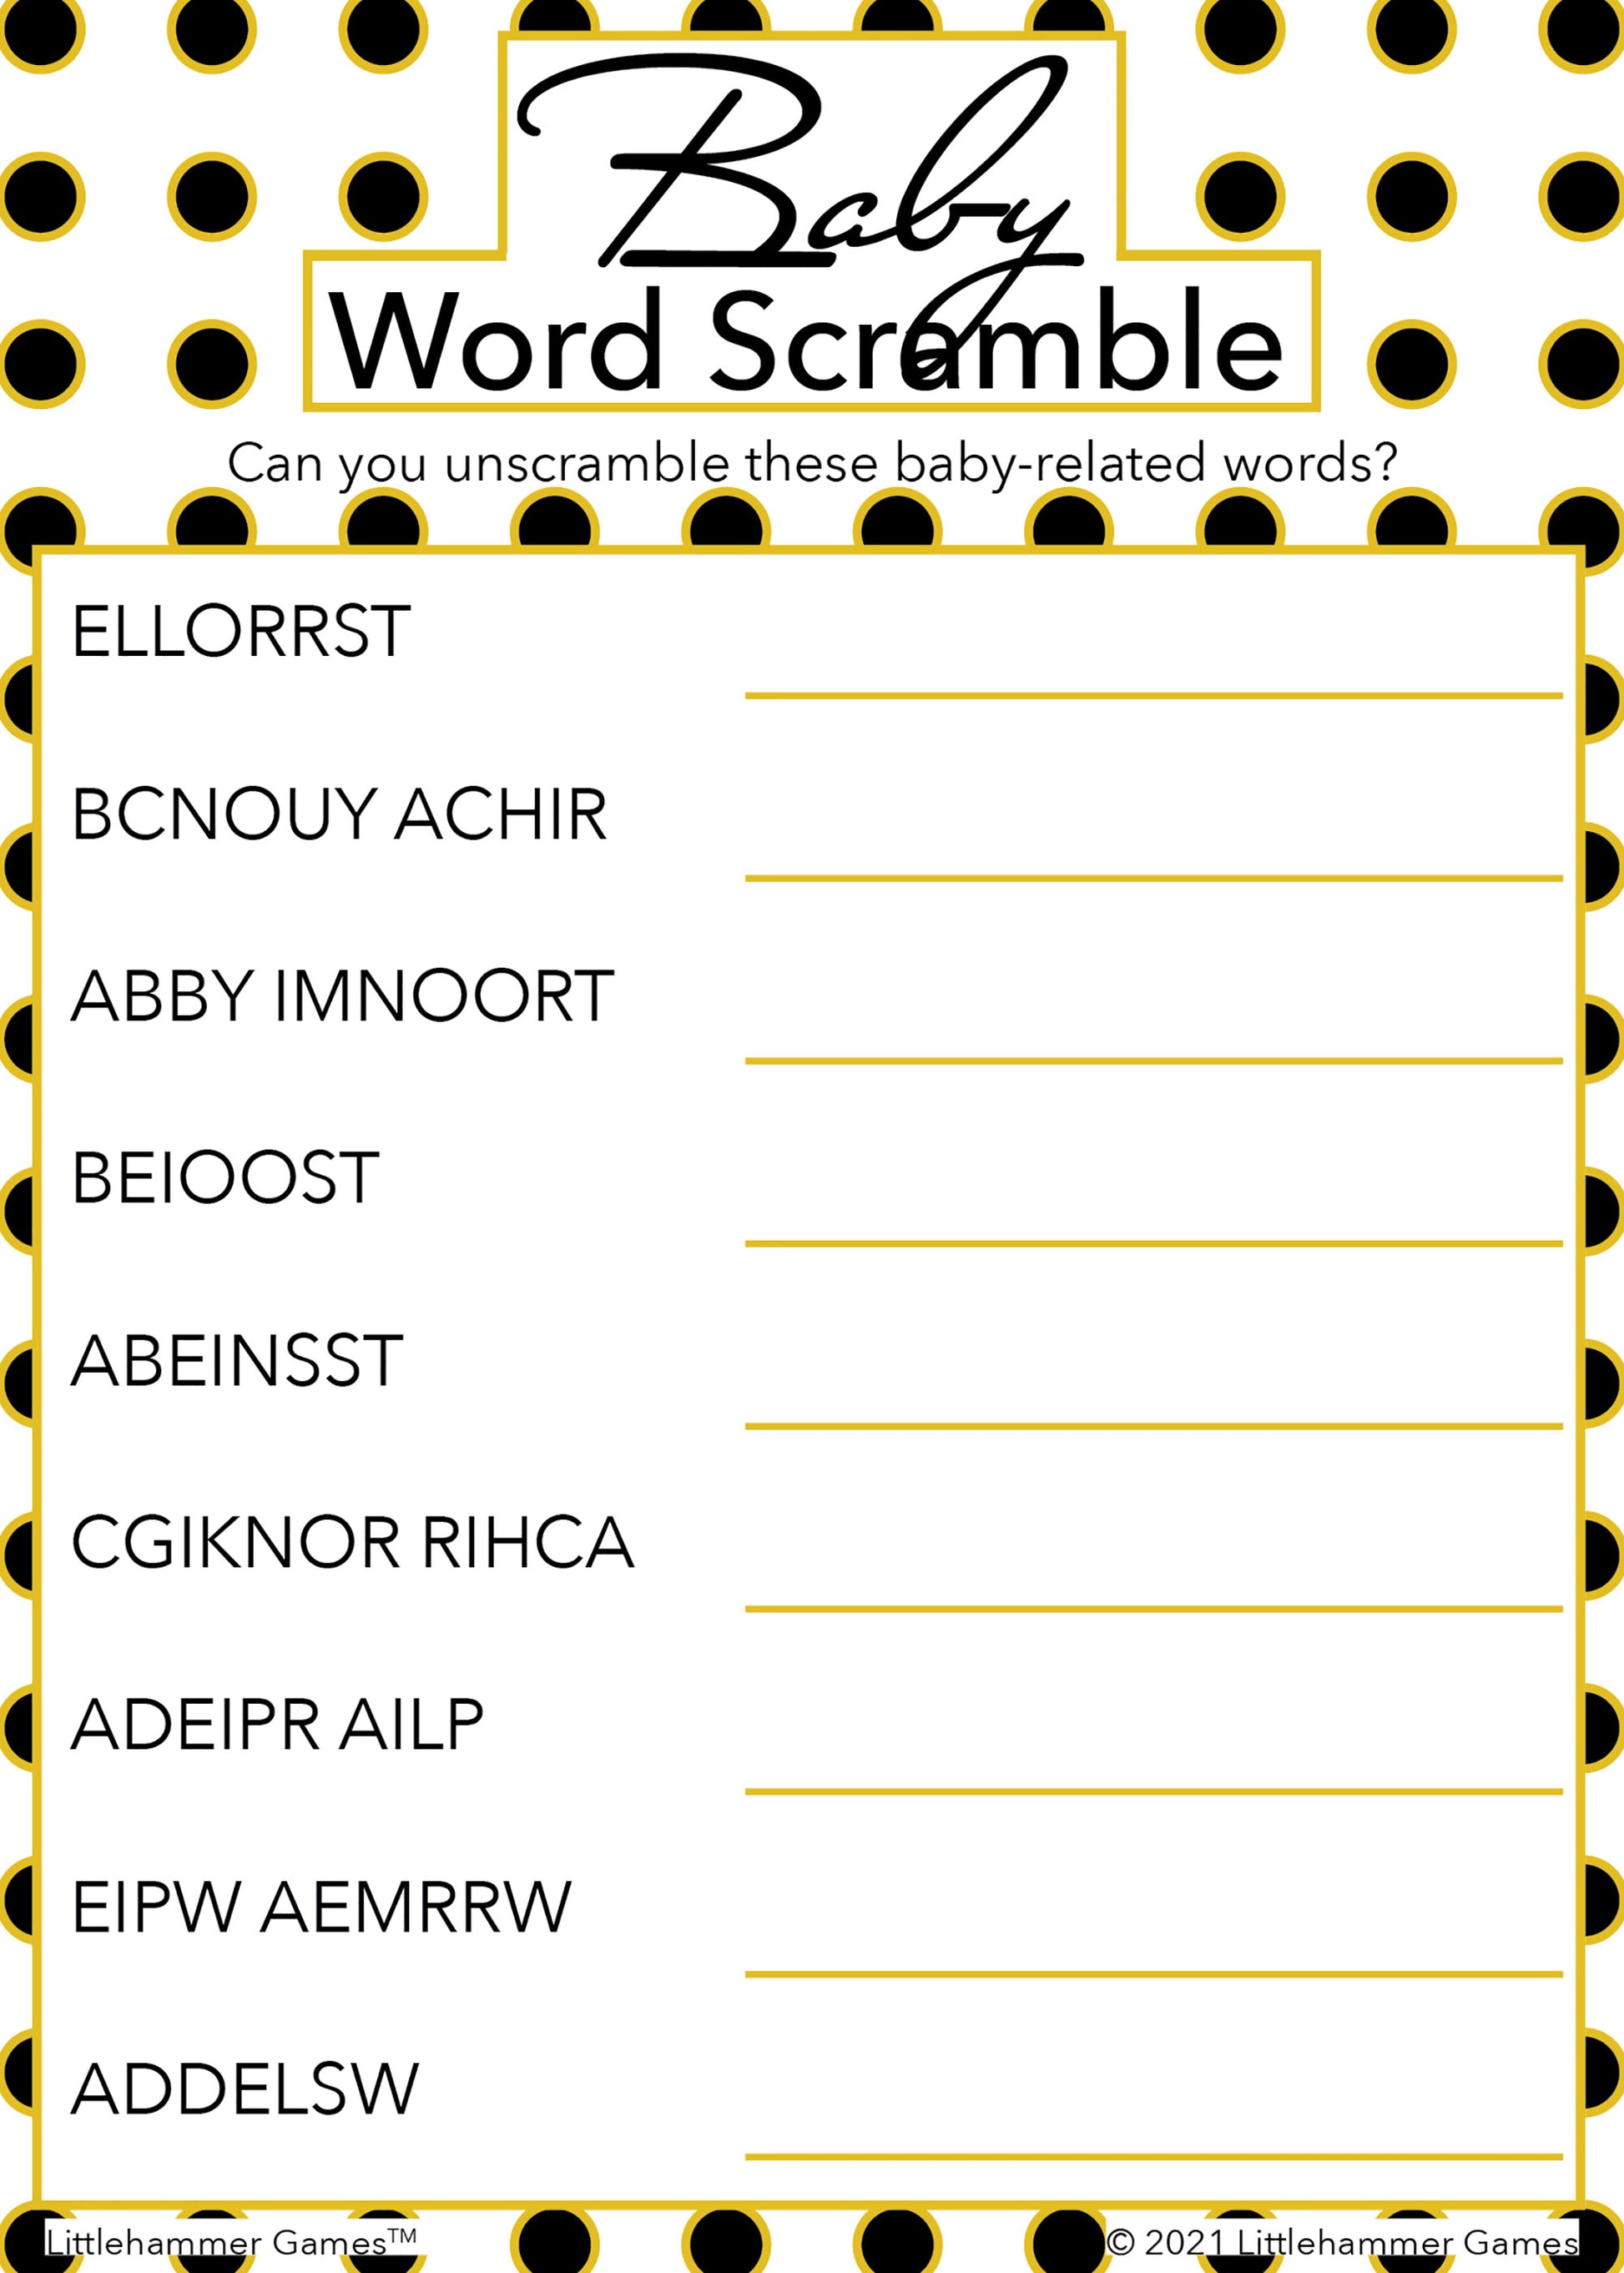 Baby Word Scramble game card with a black and gold polka dot background